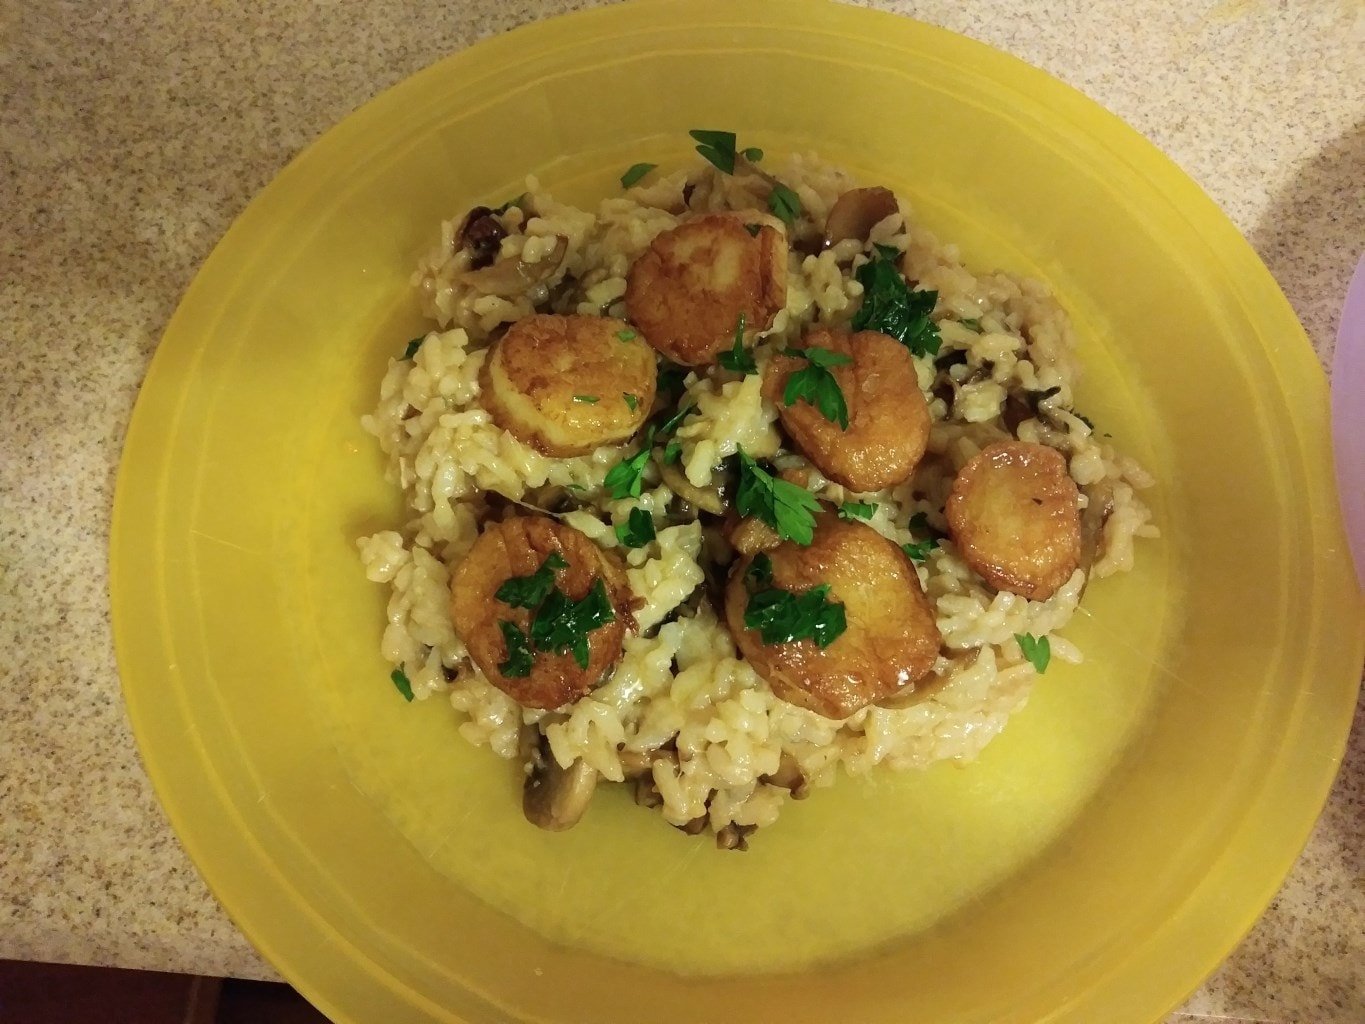 Fresh Scallops Over Truffled Mushroom Risotto with a Brown Butter Herb Sauce